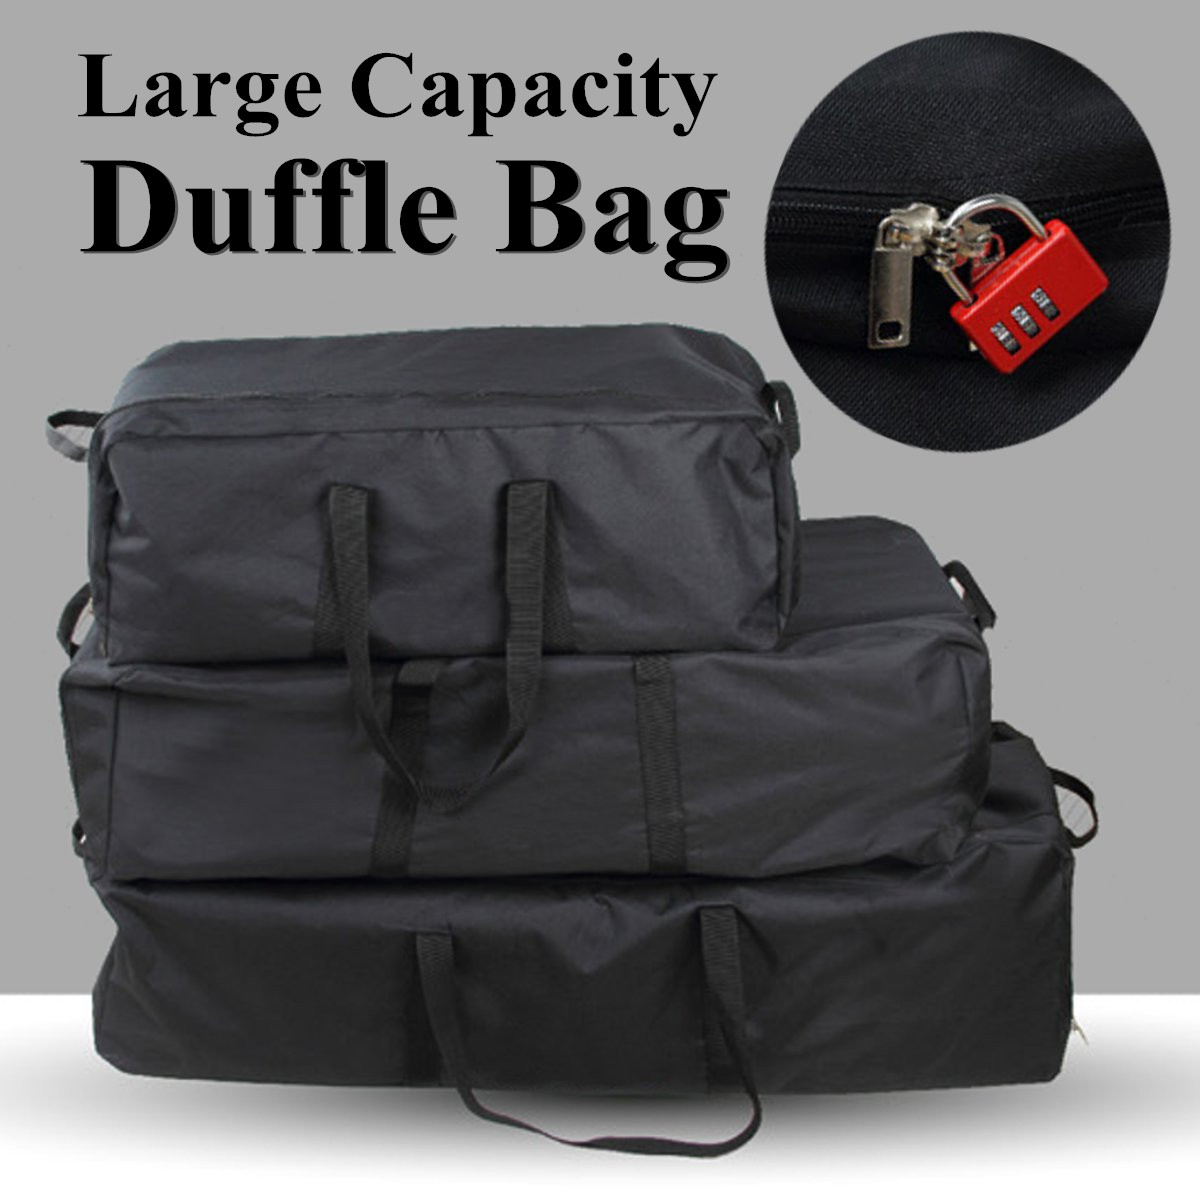 Outdoor-Camping-Travel-Duffle-Bag-Waterproof-Oxford-Foldable-Luggage-Handbag-Storage-Pouch-1376205-1